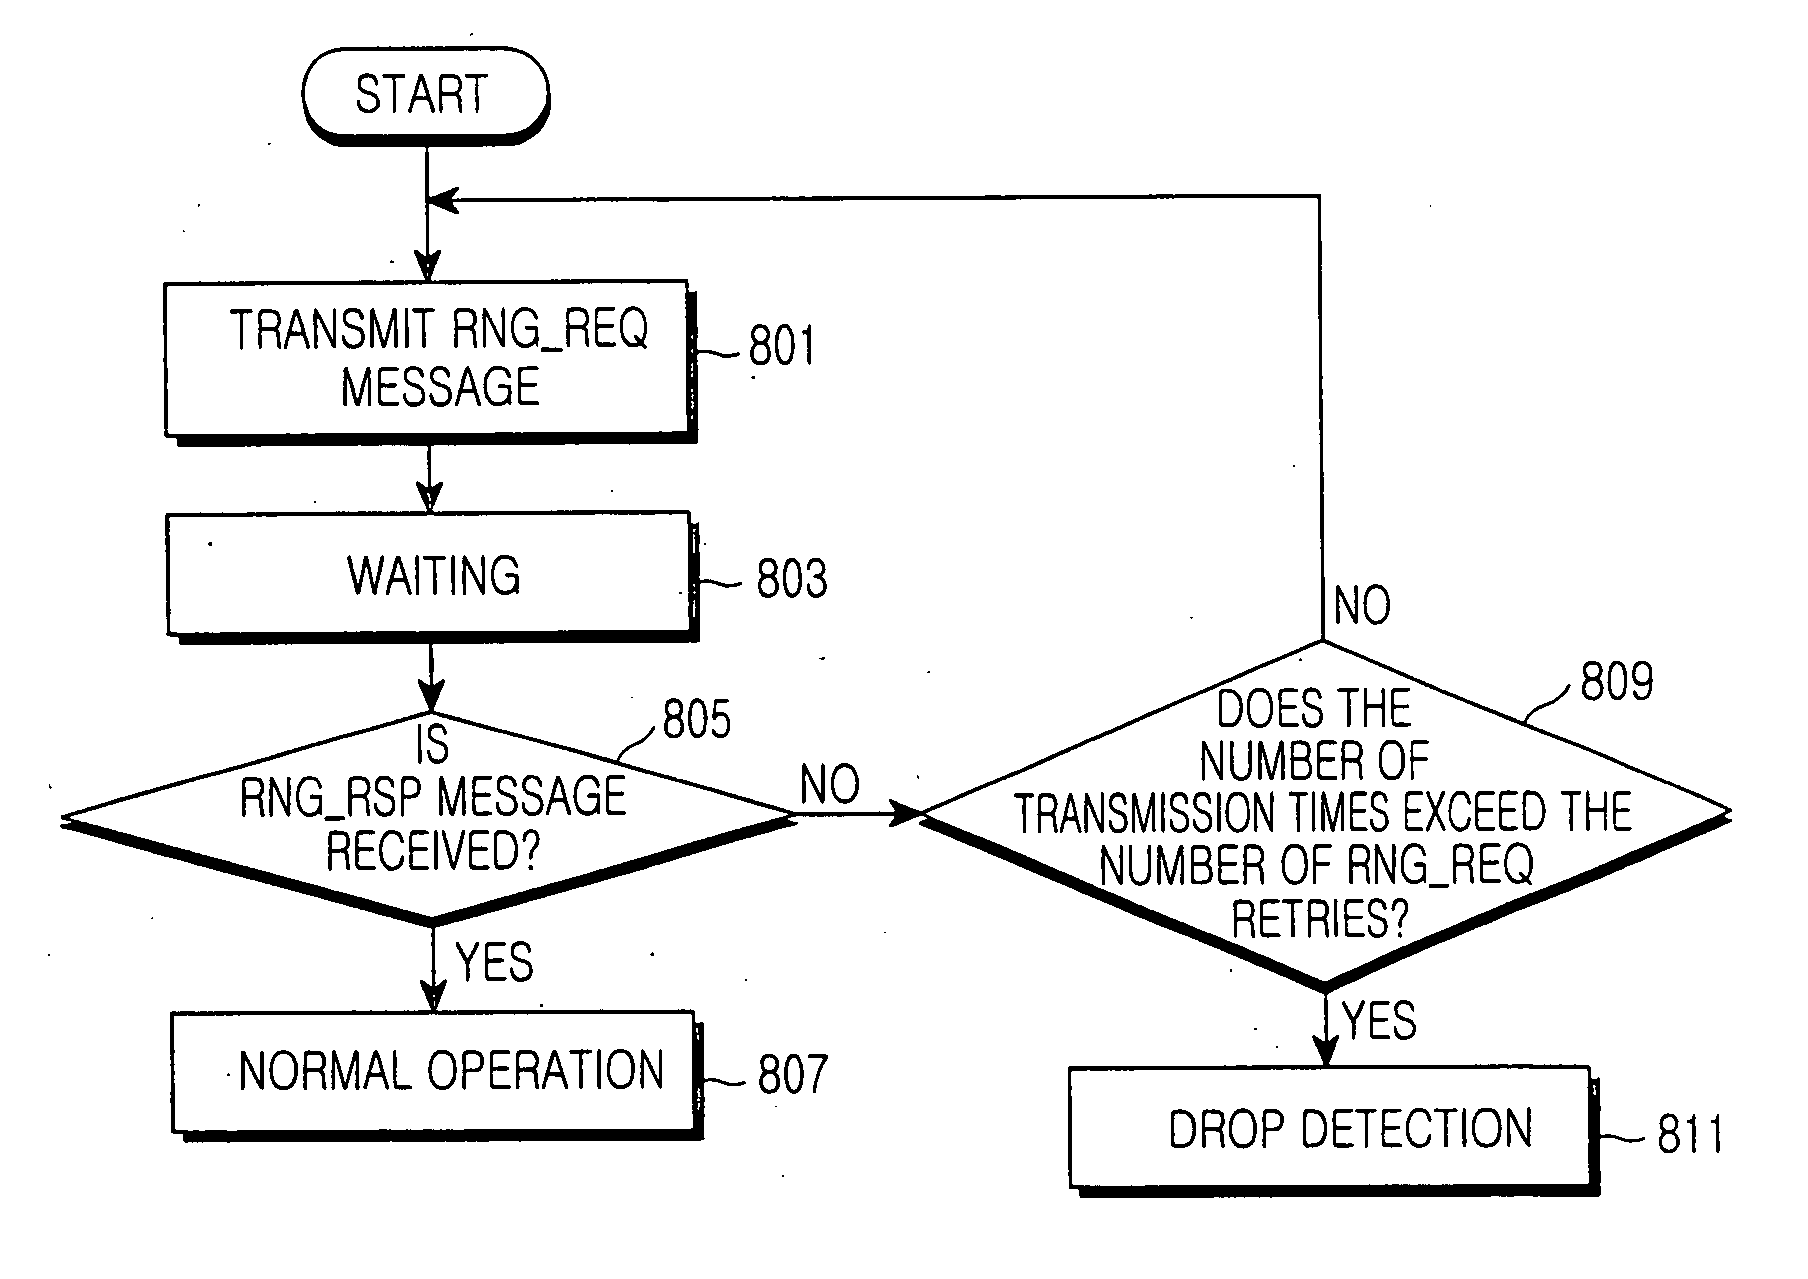 System and method for selecting a serving base station according to a drop of a mobile subscriber station in a broadband wireless access communication system